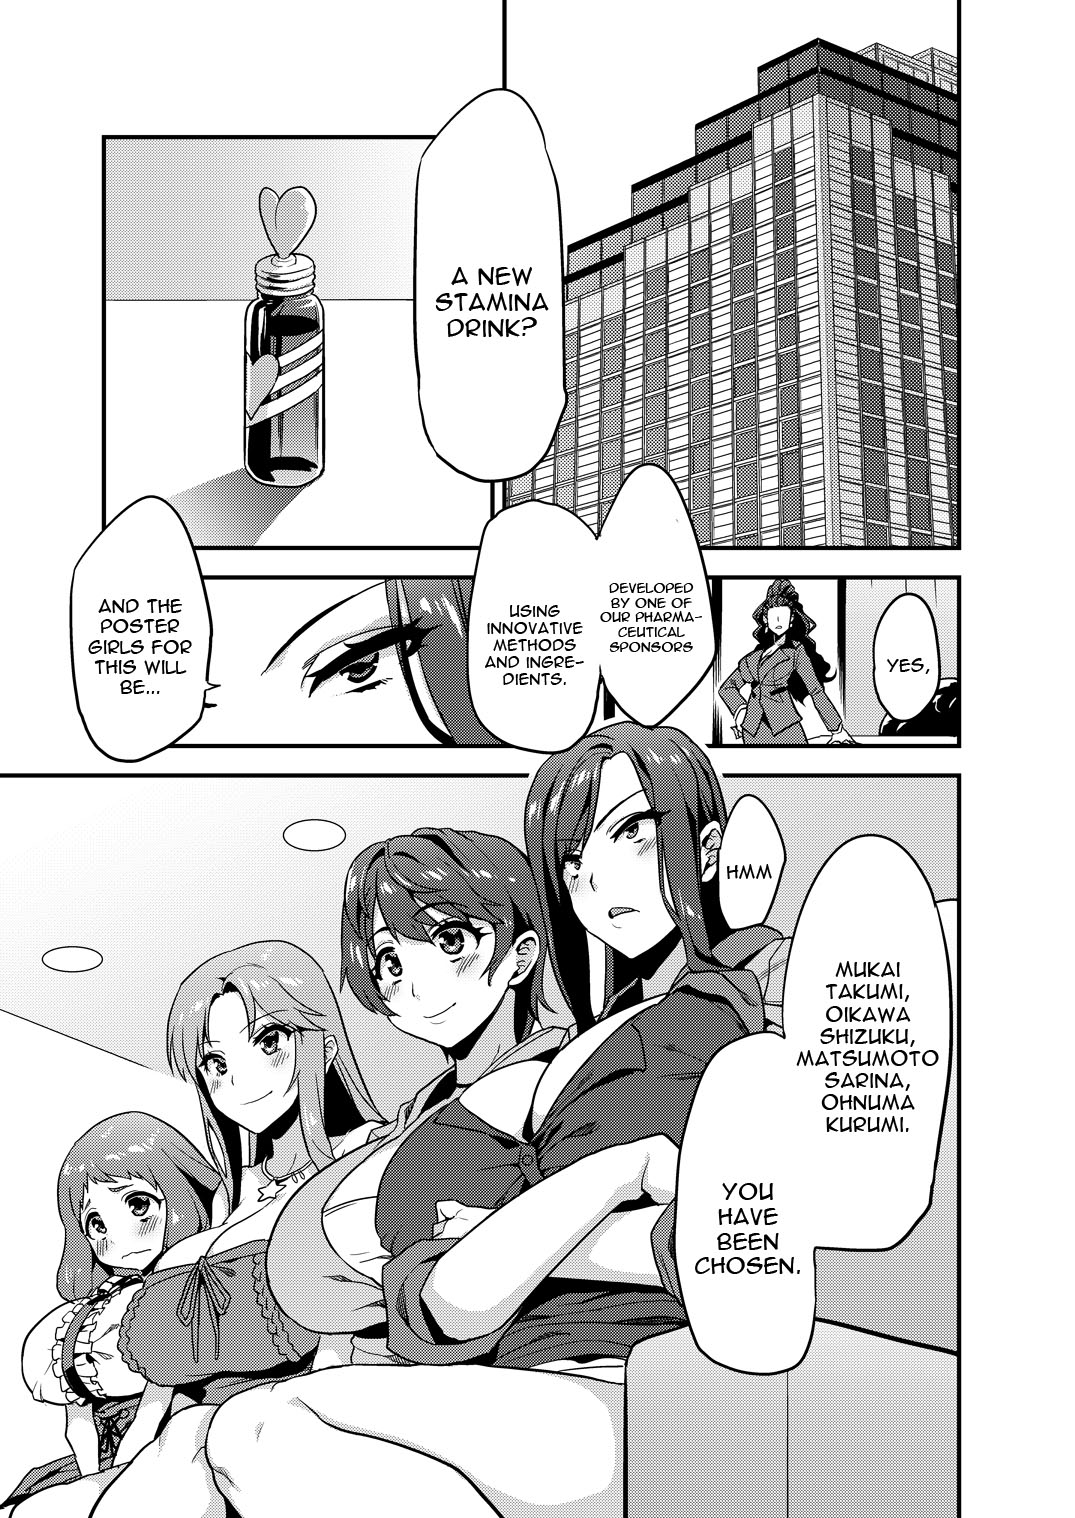 [OVing (Obui)] Hentai Idol Recycle (THE IDOLM@STER CINDERELLA GIRLS) [English] [constantly] [Digital] page 3 full